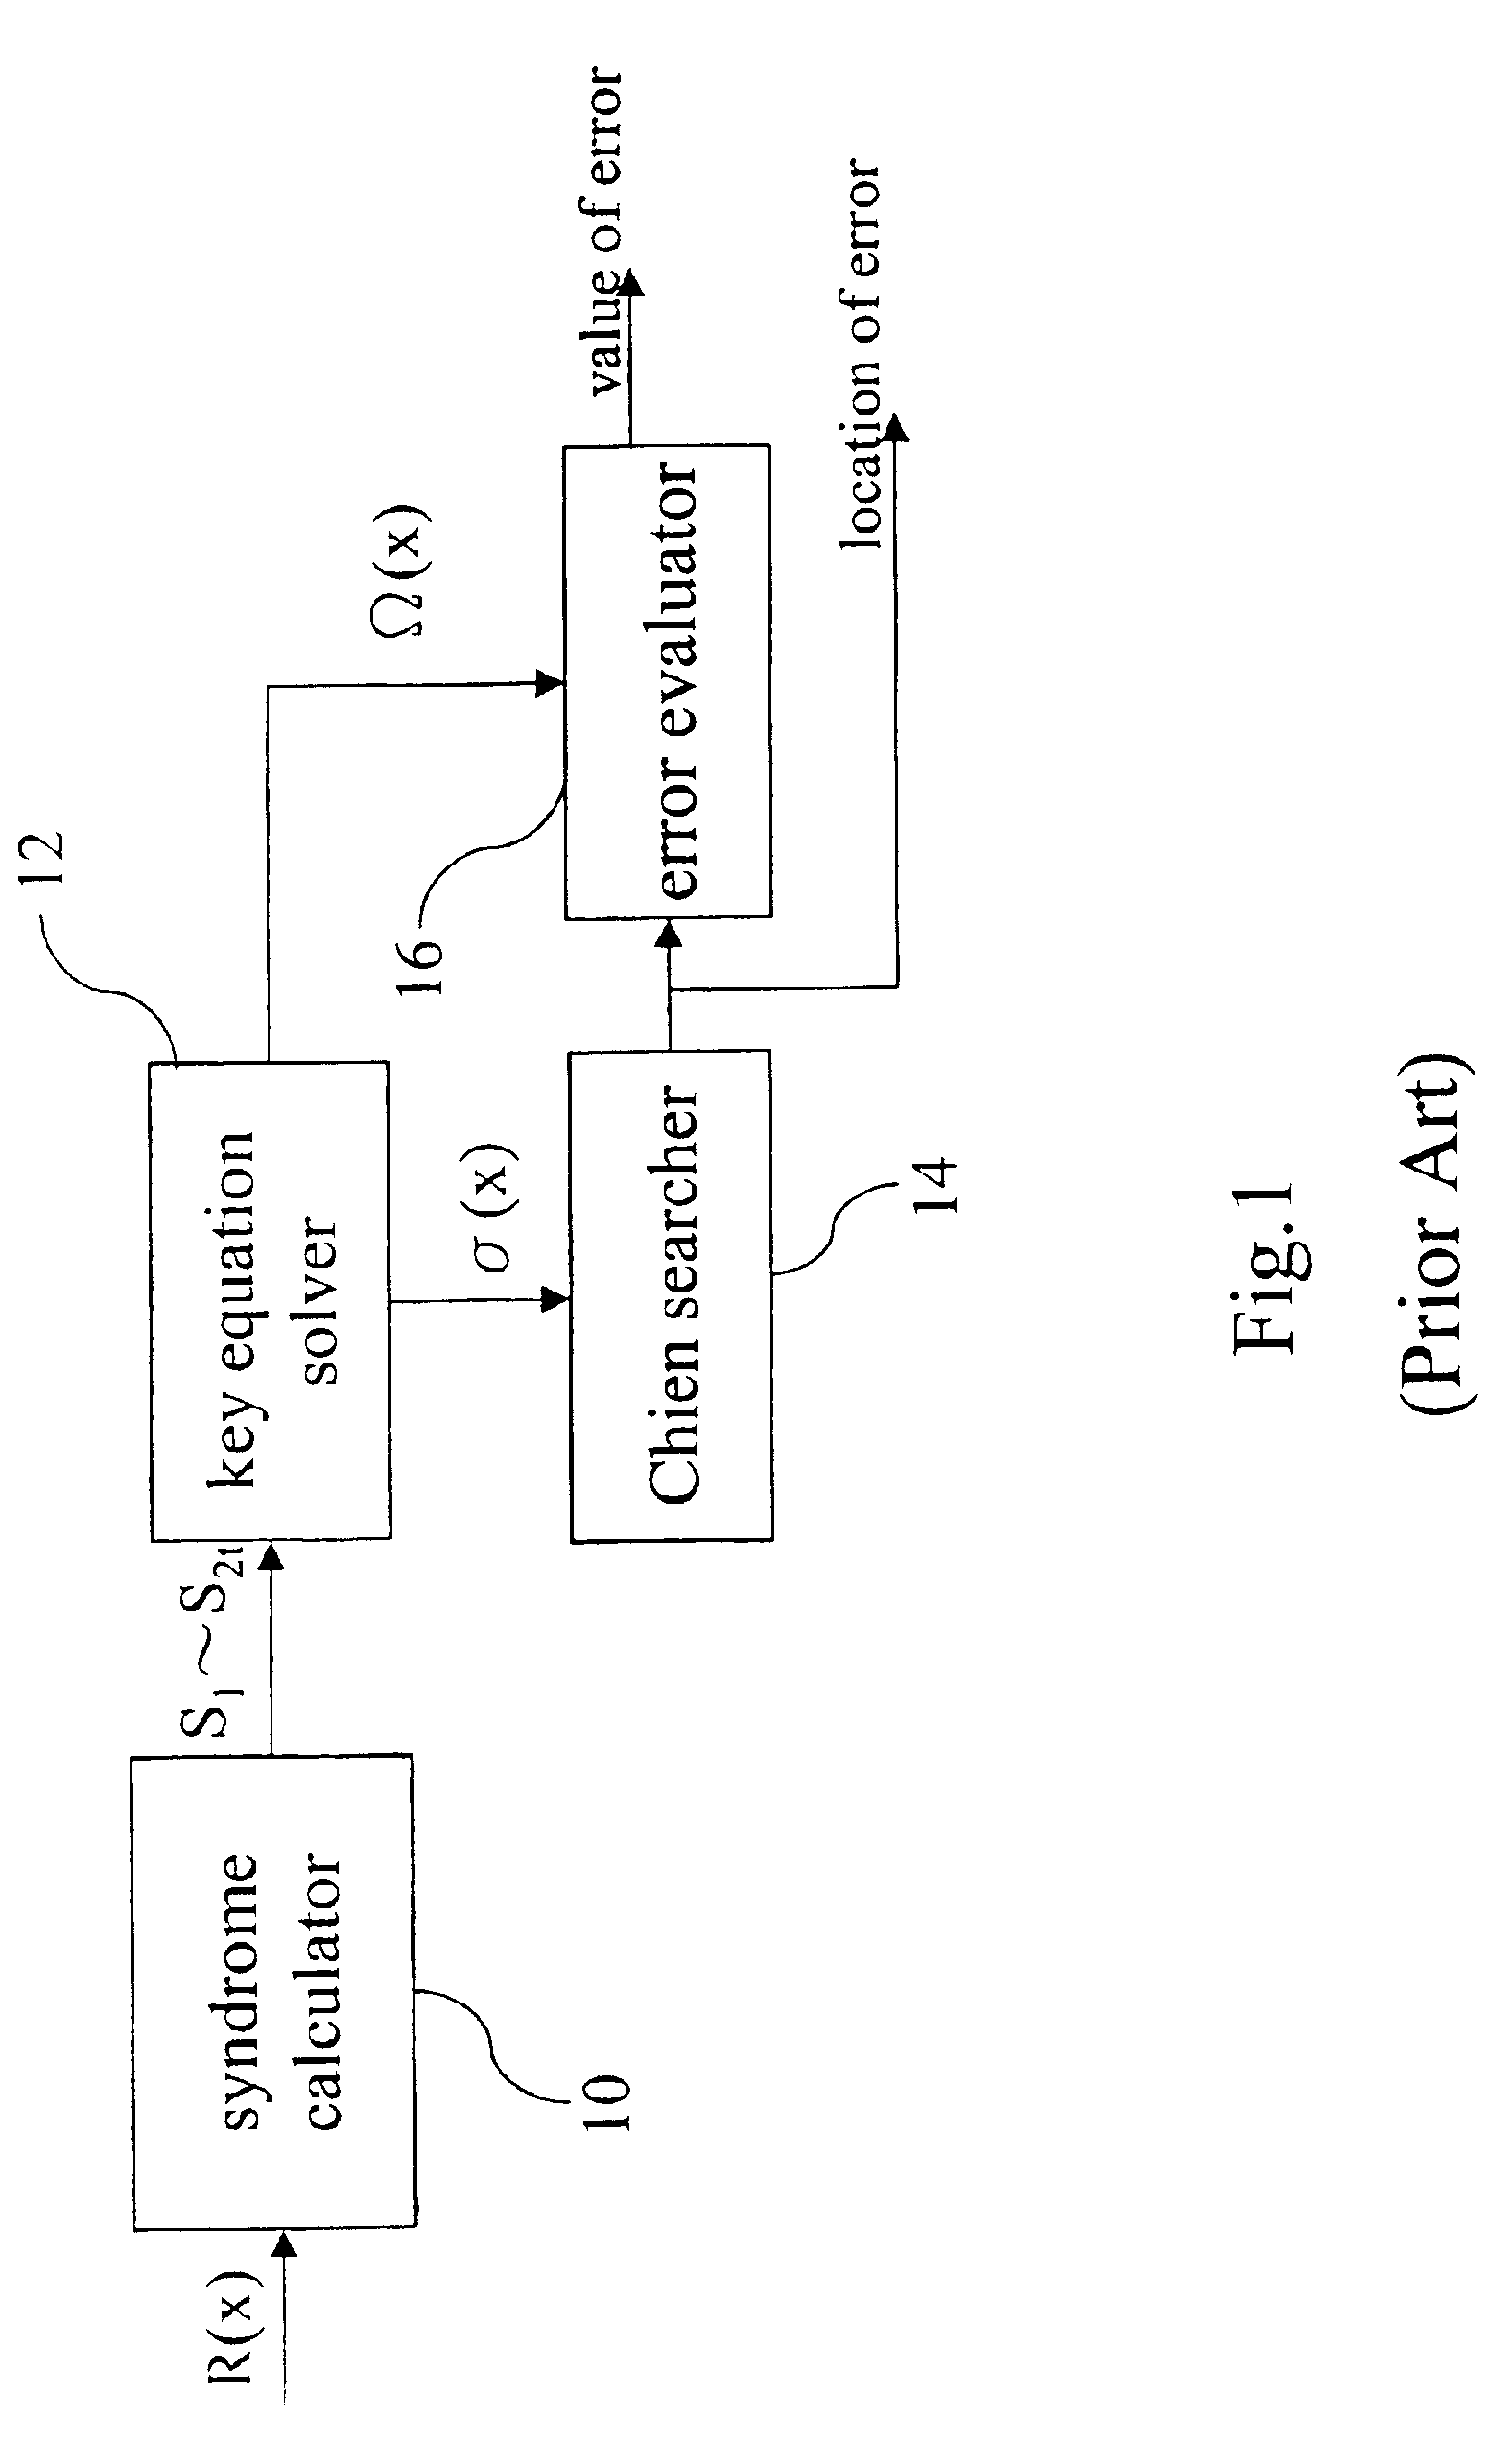 Method for calculating syndrome polynomial in decoding error correction codes